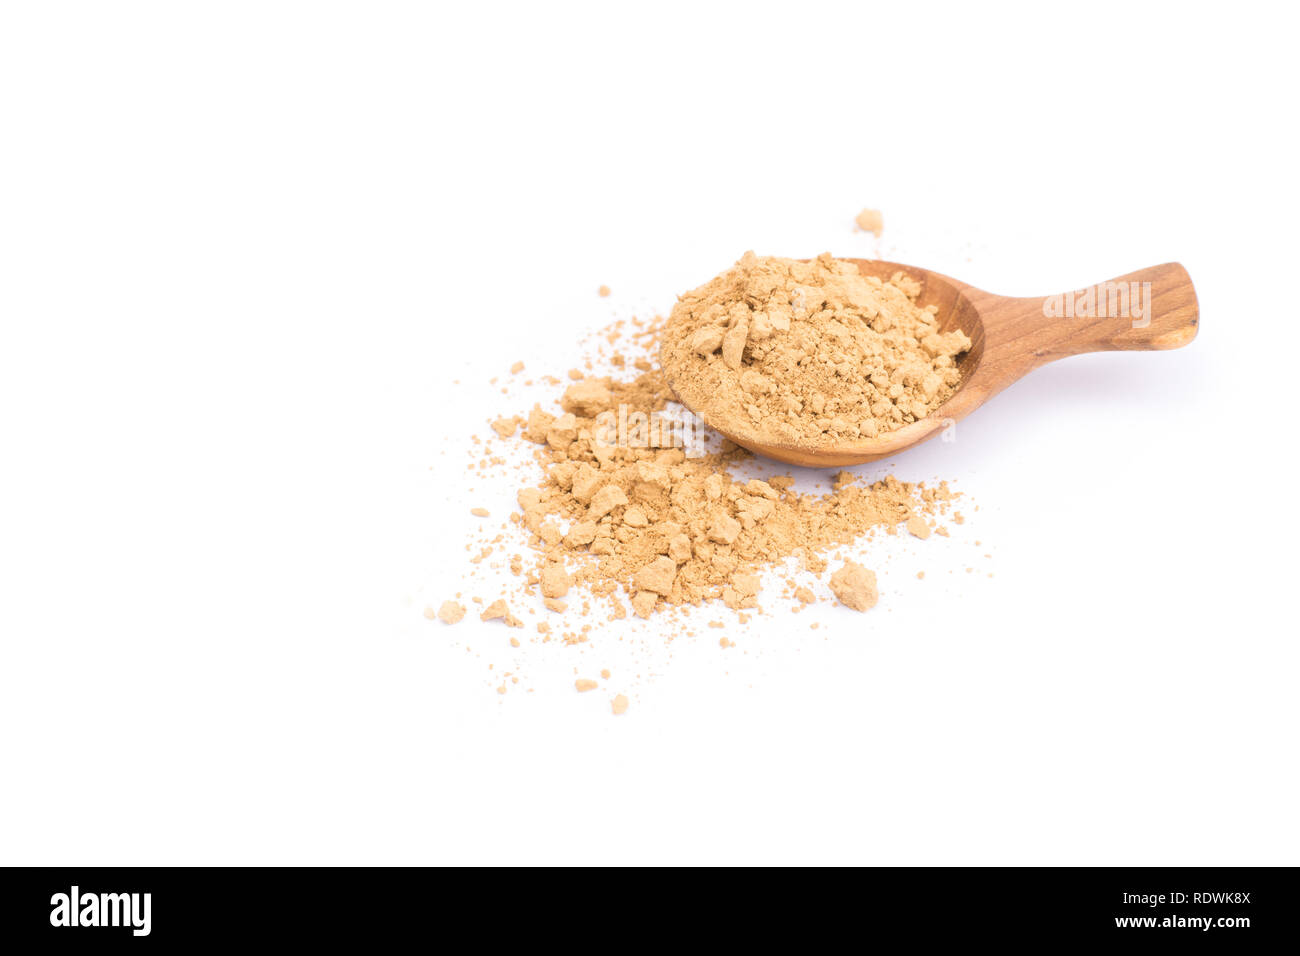 Indian Gooseberry or Phyllanthus emblica powder on wooden spoon isolated on white background Stock Photo